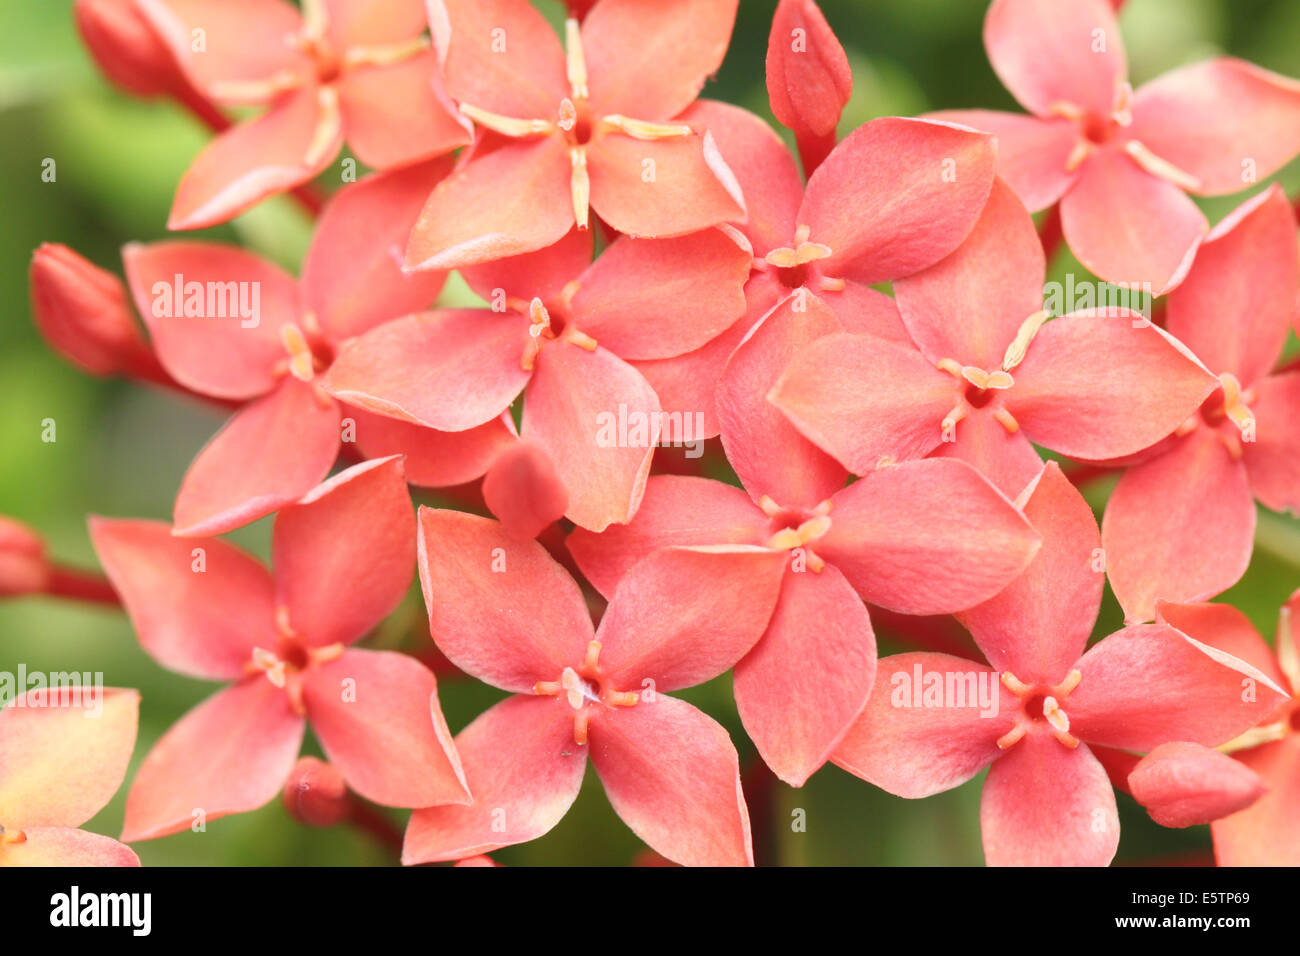 Rubiaceae of red flower in the garden for natural background. Stock Photo